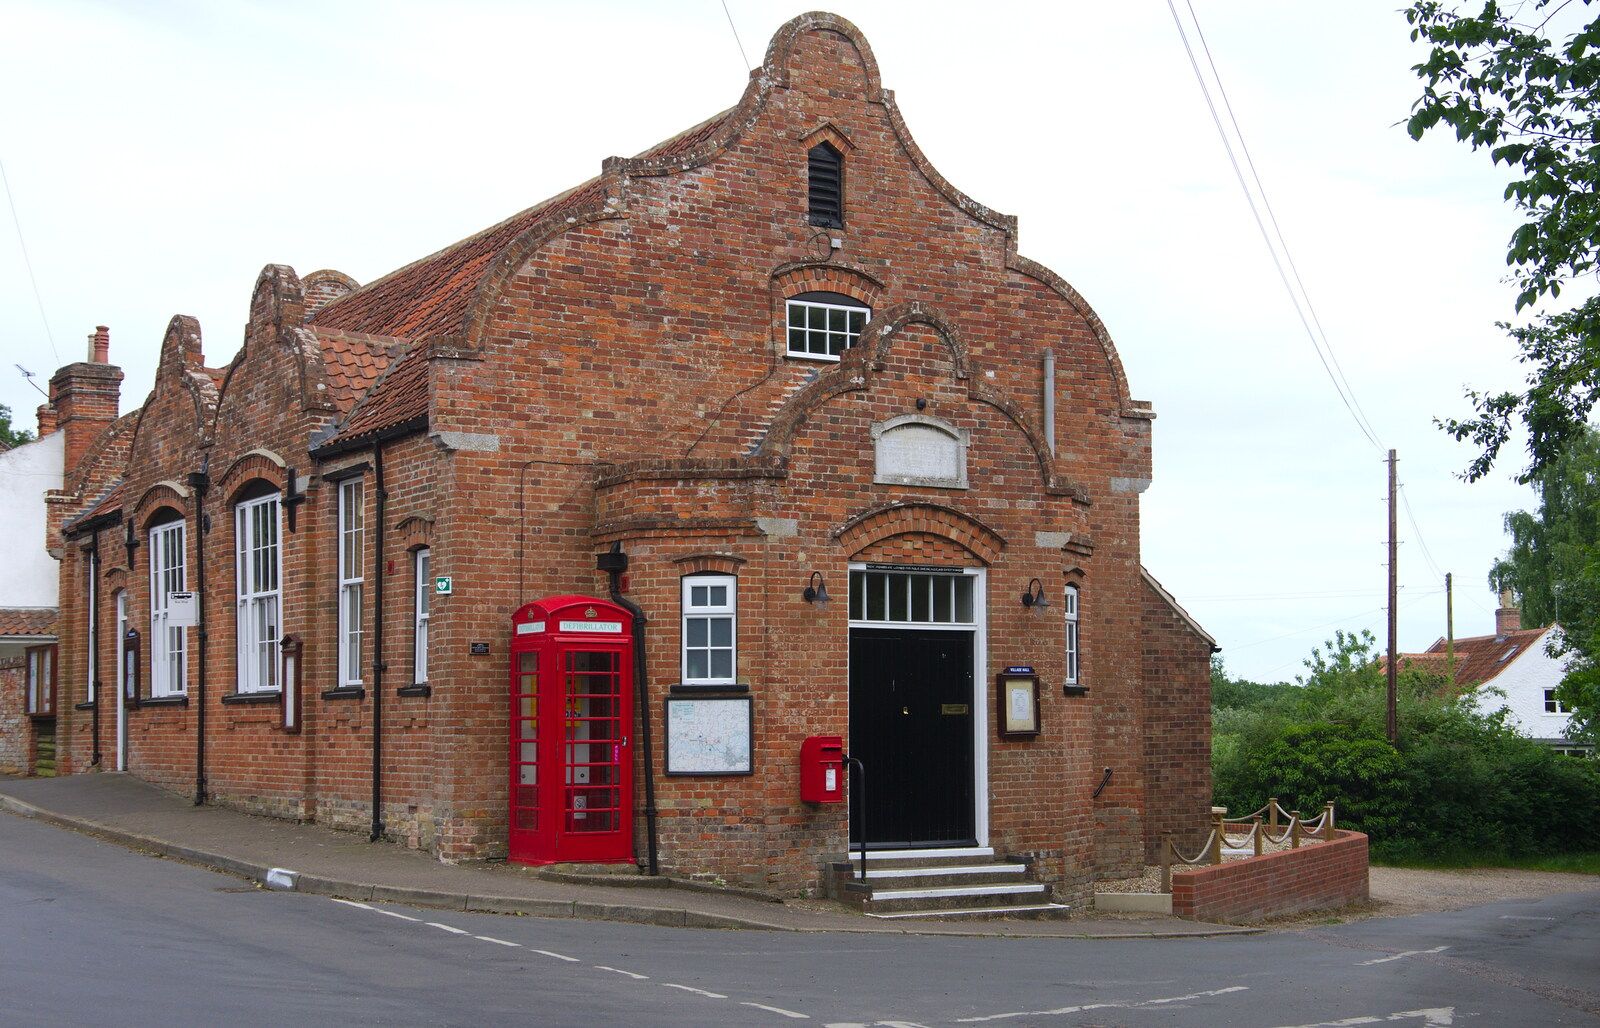 The Geldeston community hall and K6 phonebox from Camping at Three Rivers, Geldeston, Norfolk - 1st June 2019